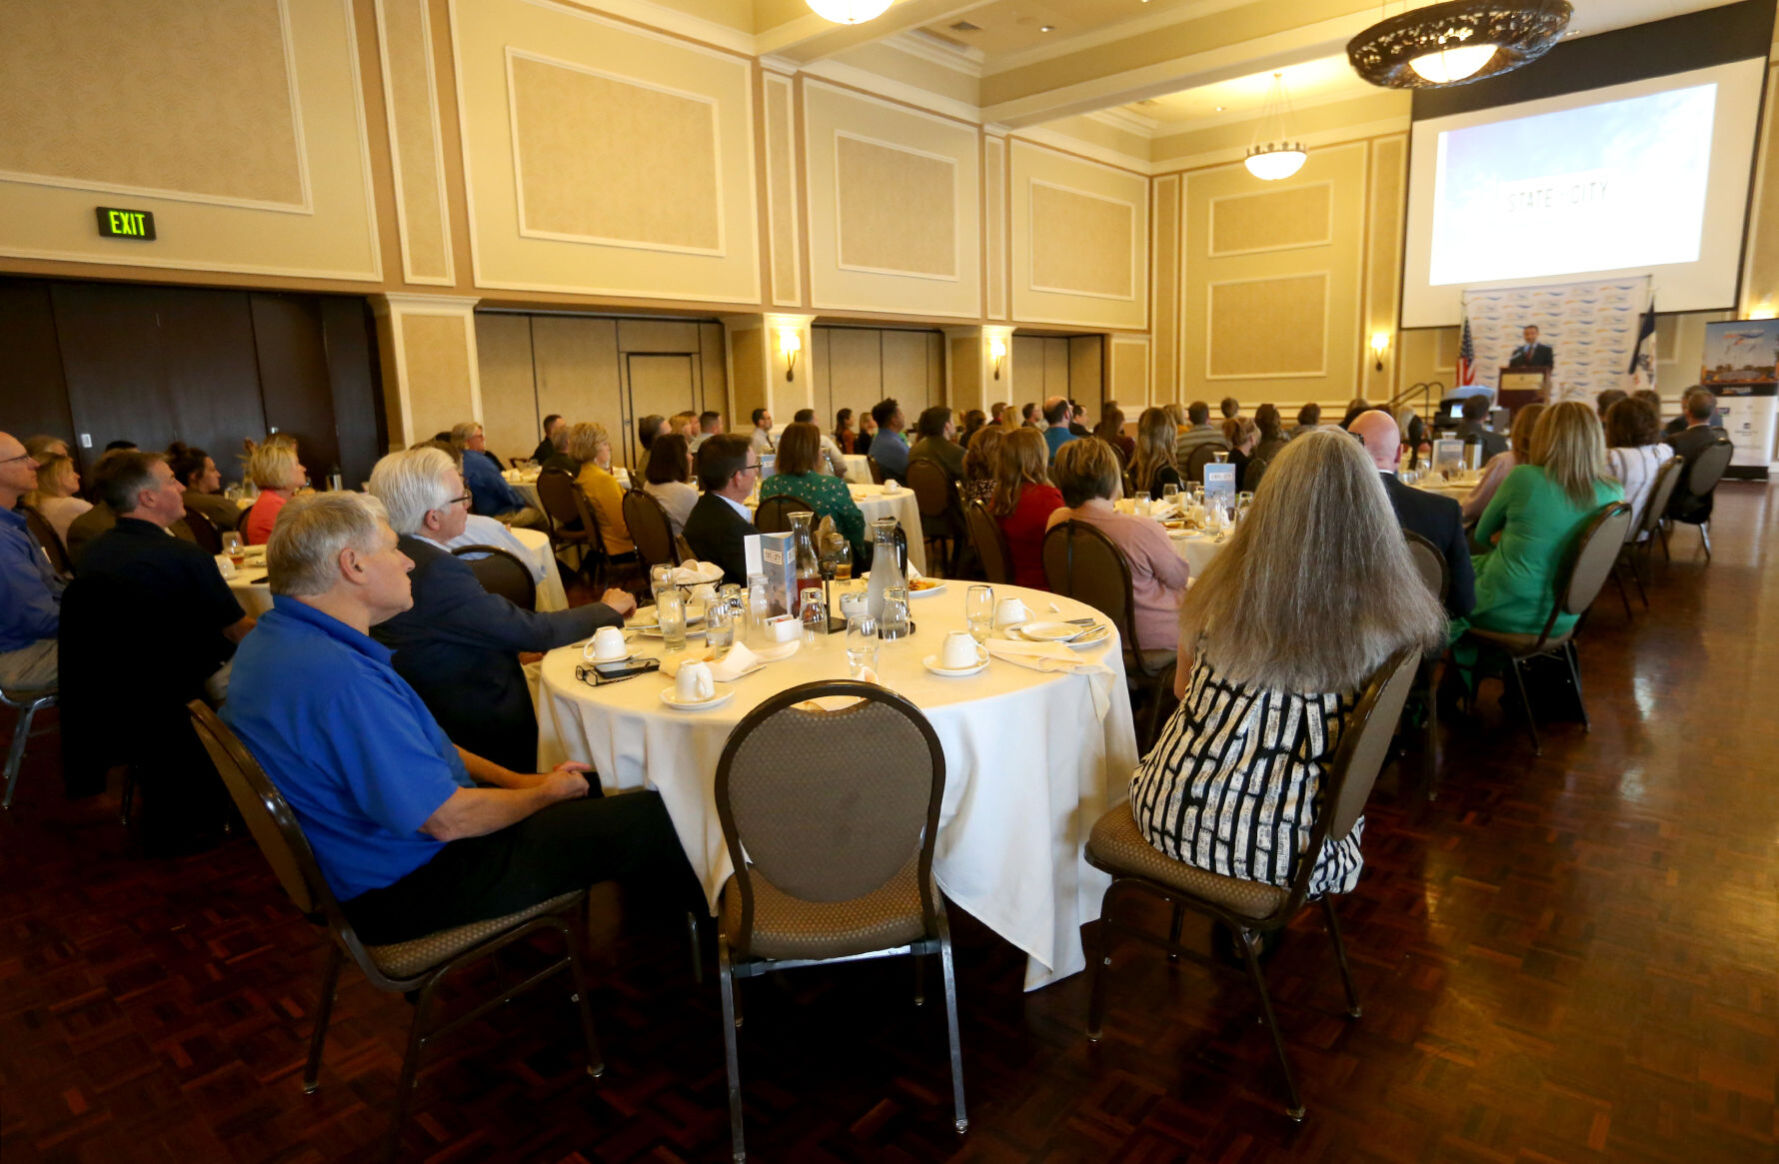 Attendees listen to Dubuque Mayor Brad Cavanagh speak during the State of the City luncheon at Hotel Julien Dubuque on Tuesday, Oct. 11.    PHOTO CREDIT: JESSICA REILLY